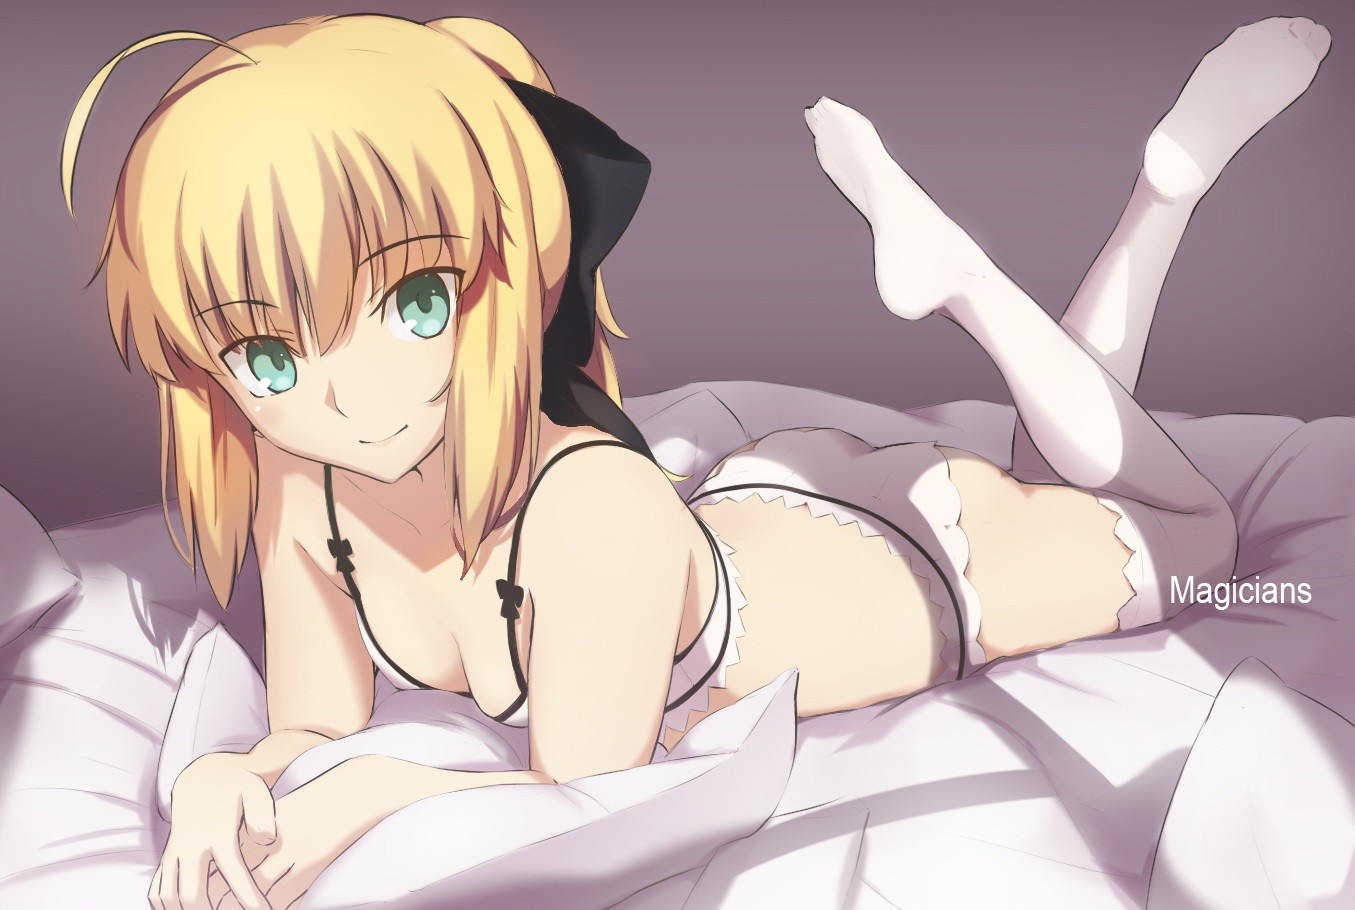 Anime 1355x910 anime anime girls ecchi Saber Lily underwear Fate series Saber ahoge thigh-highs lying on front in bed Magicians Pixiv legs up smiling bright